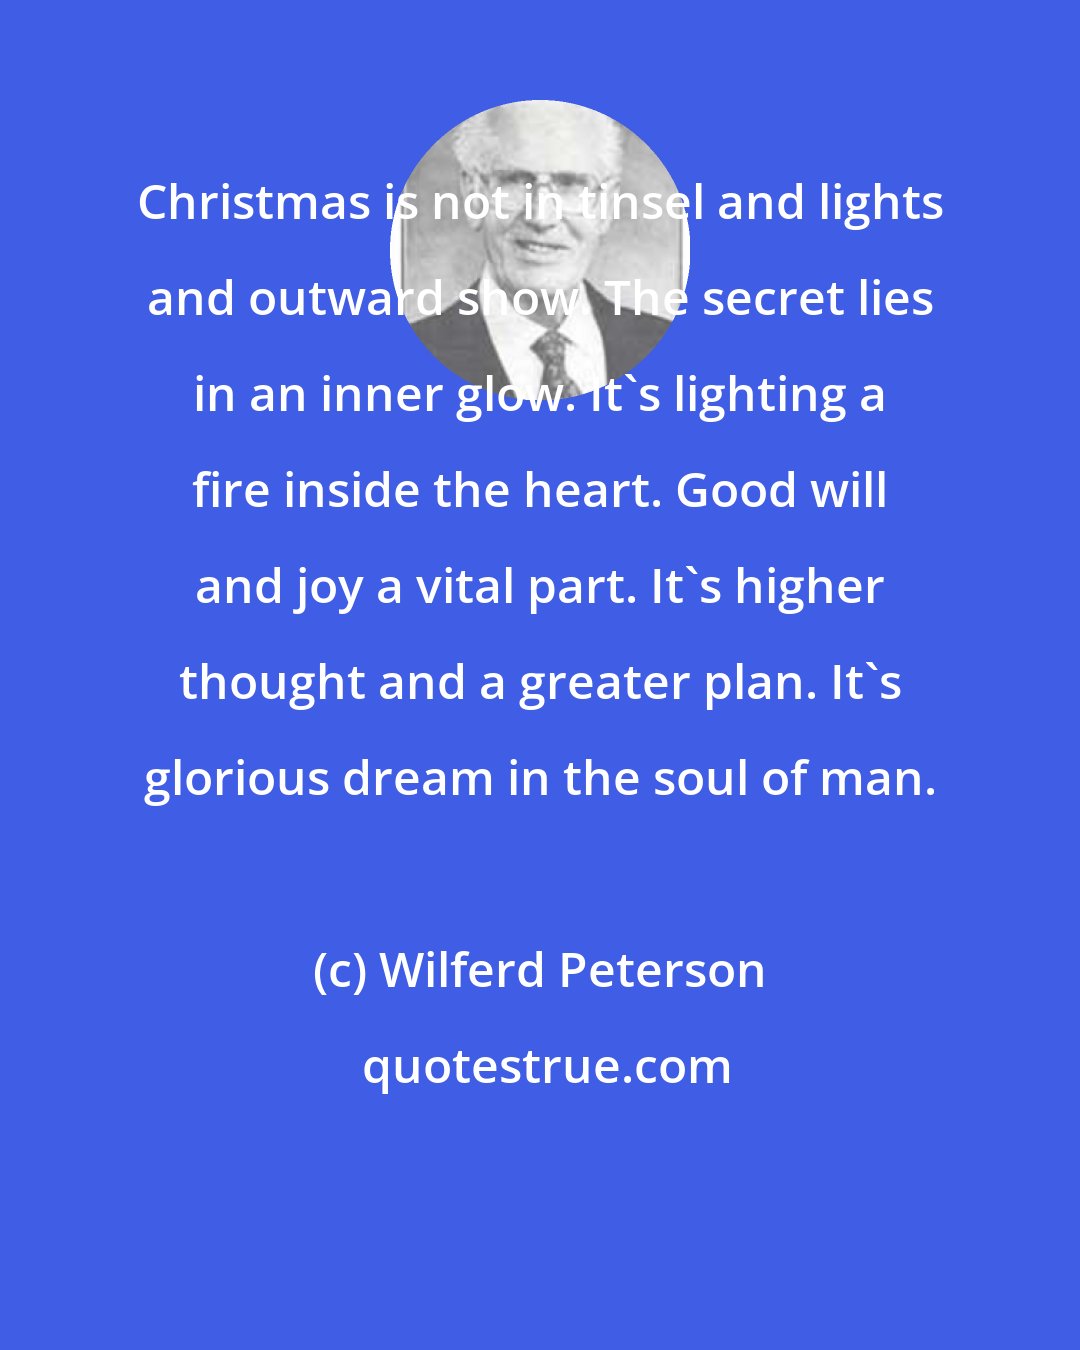 Wilferd Peterson: Christmas is not in tinsel and lights and outward show. The secret lies in an inner glow. It's lighting a fire inside the heart. Good will and joy a vital part. It's higher thought and a greater plan. It's glorious dream in the soul of man.